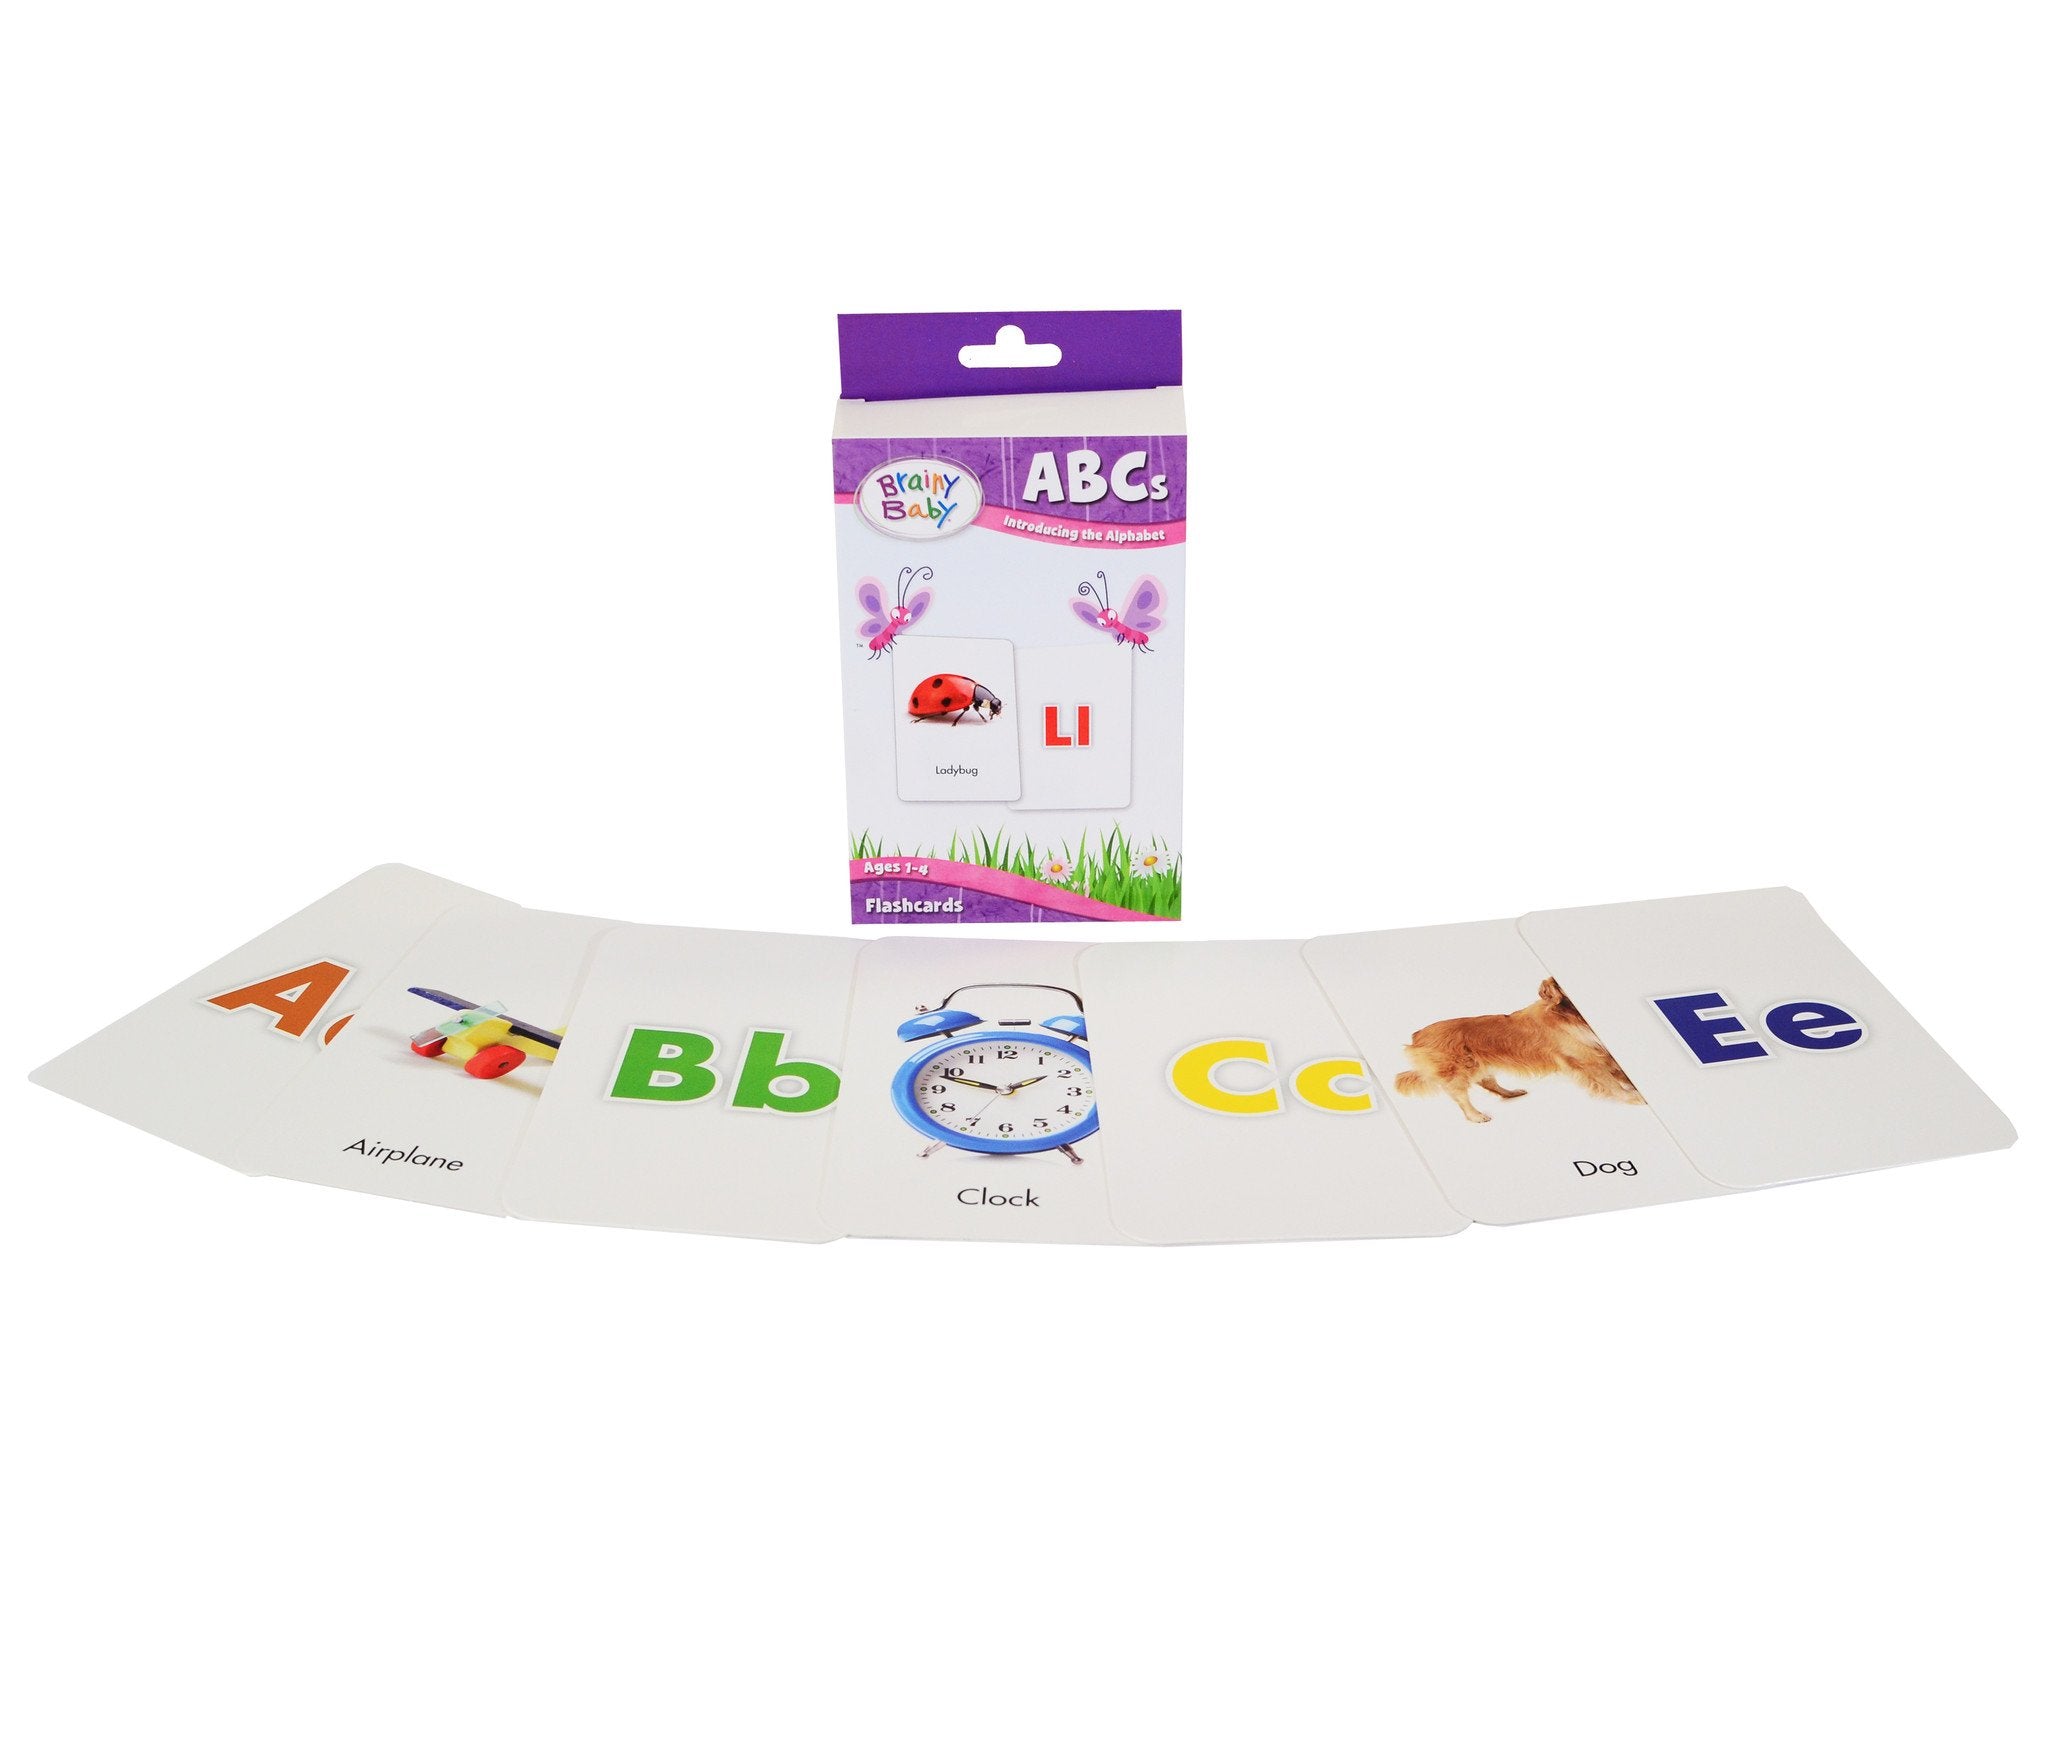 Brainy Baby® ABCs Introducing the Alphabet Board Book, Flashcards & DVD Collection for Preschool Children